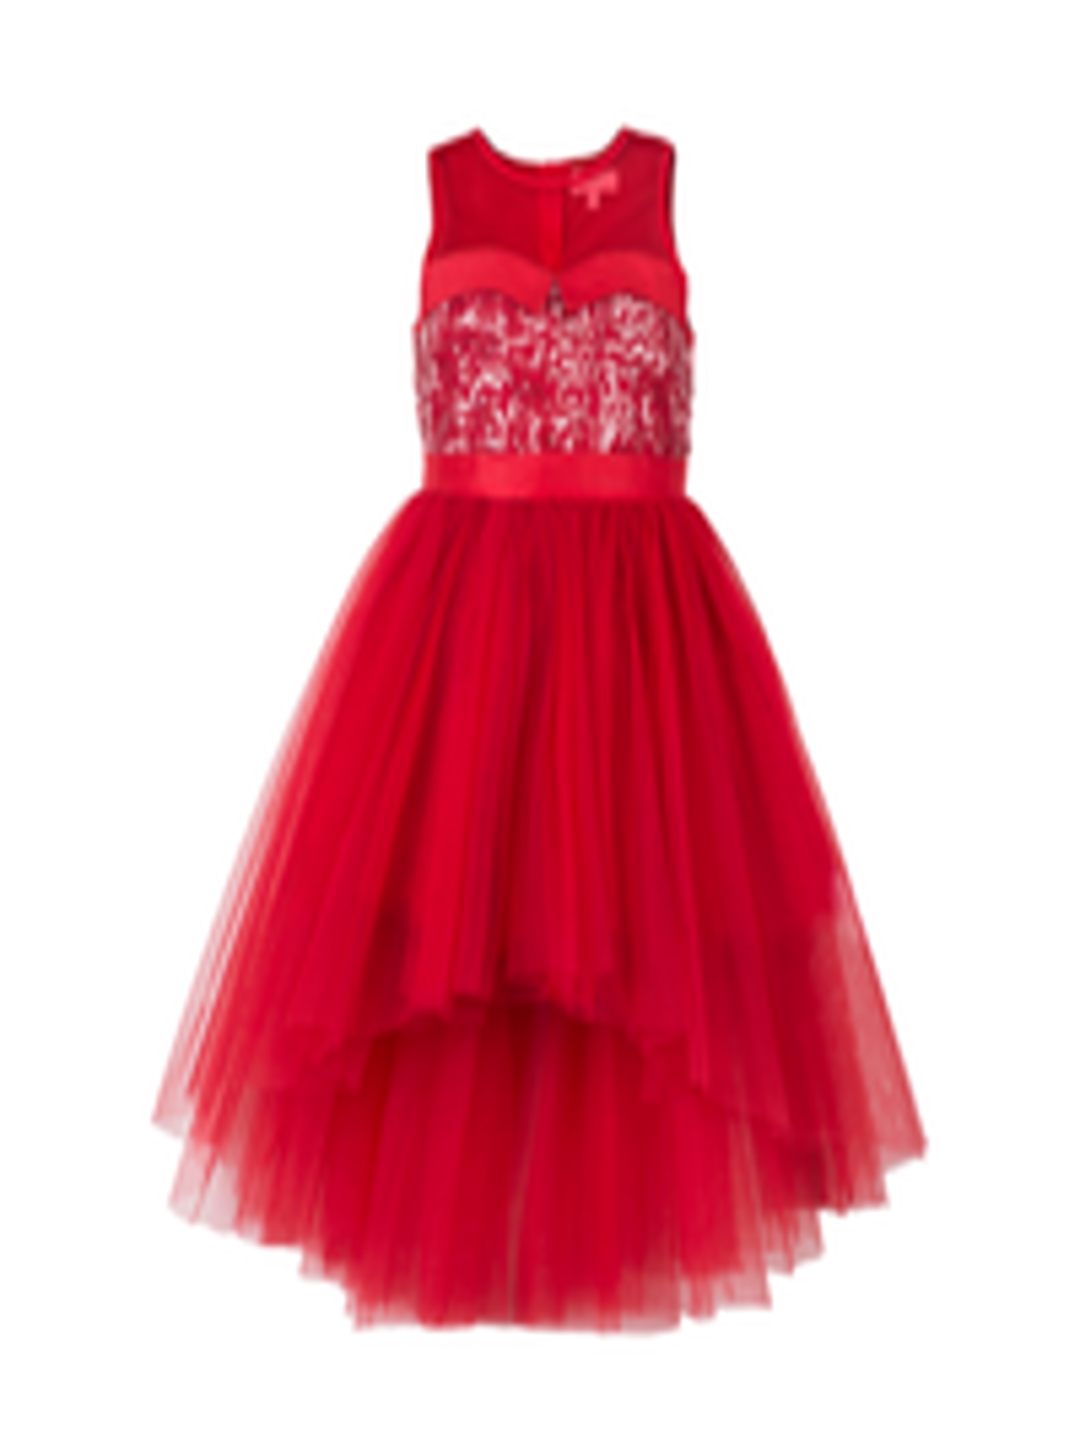 Buy Toy Balloon Kids Girls Red Embellished Fit And Flare Dress ...